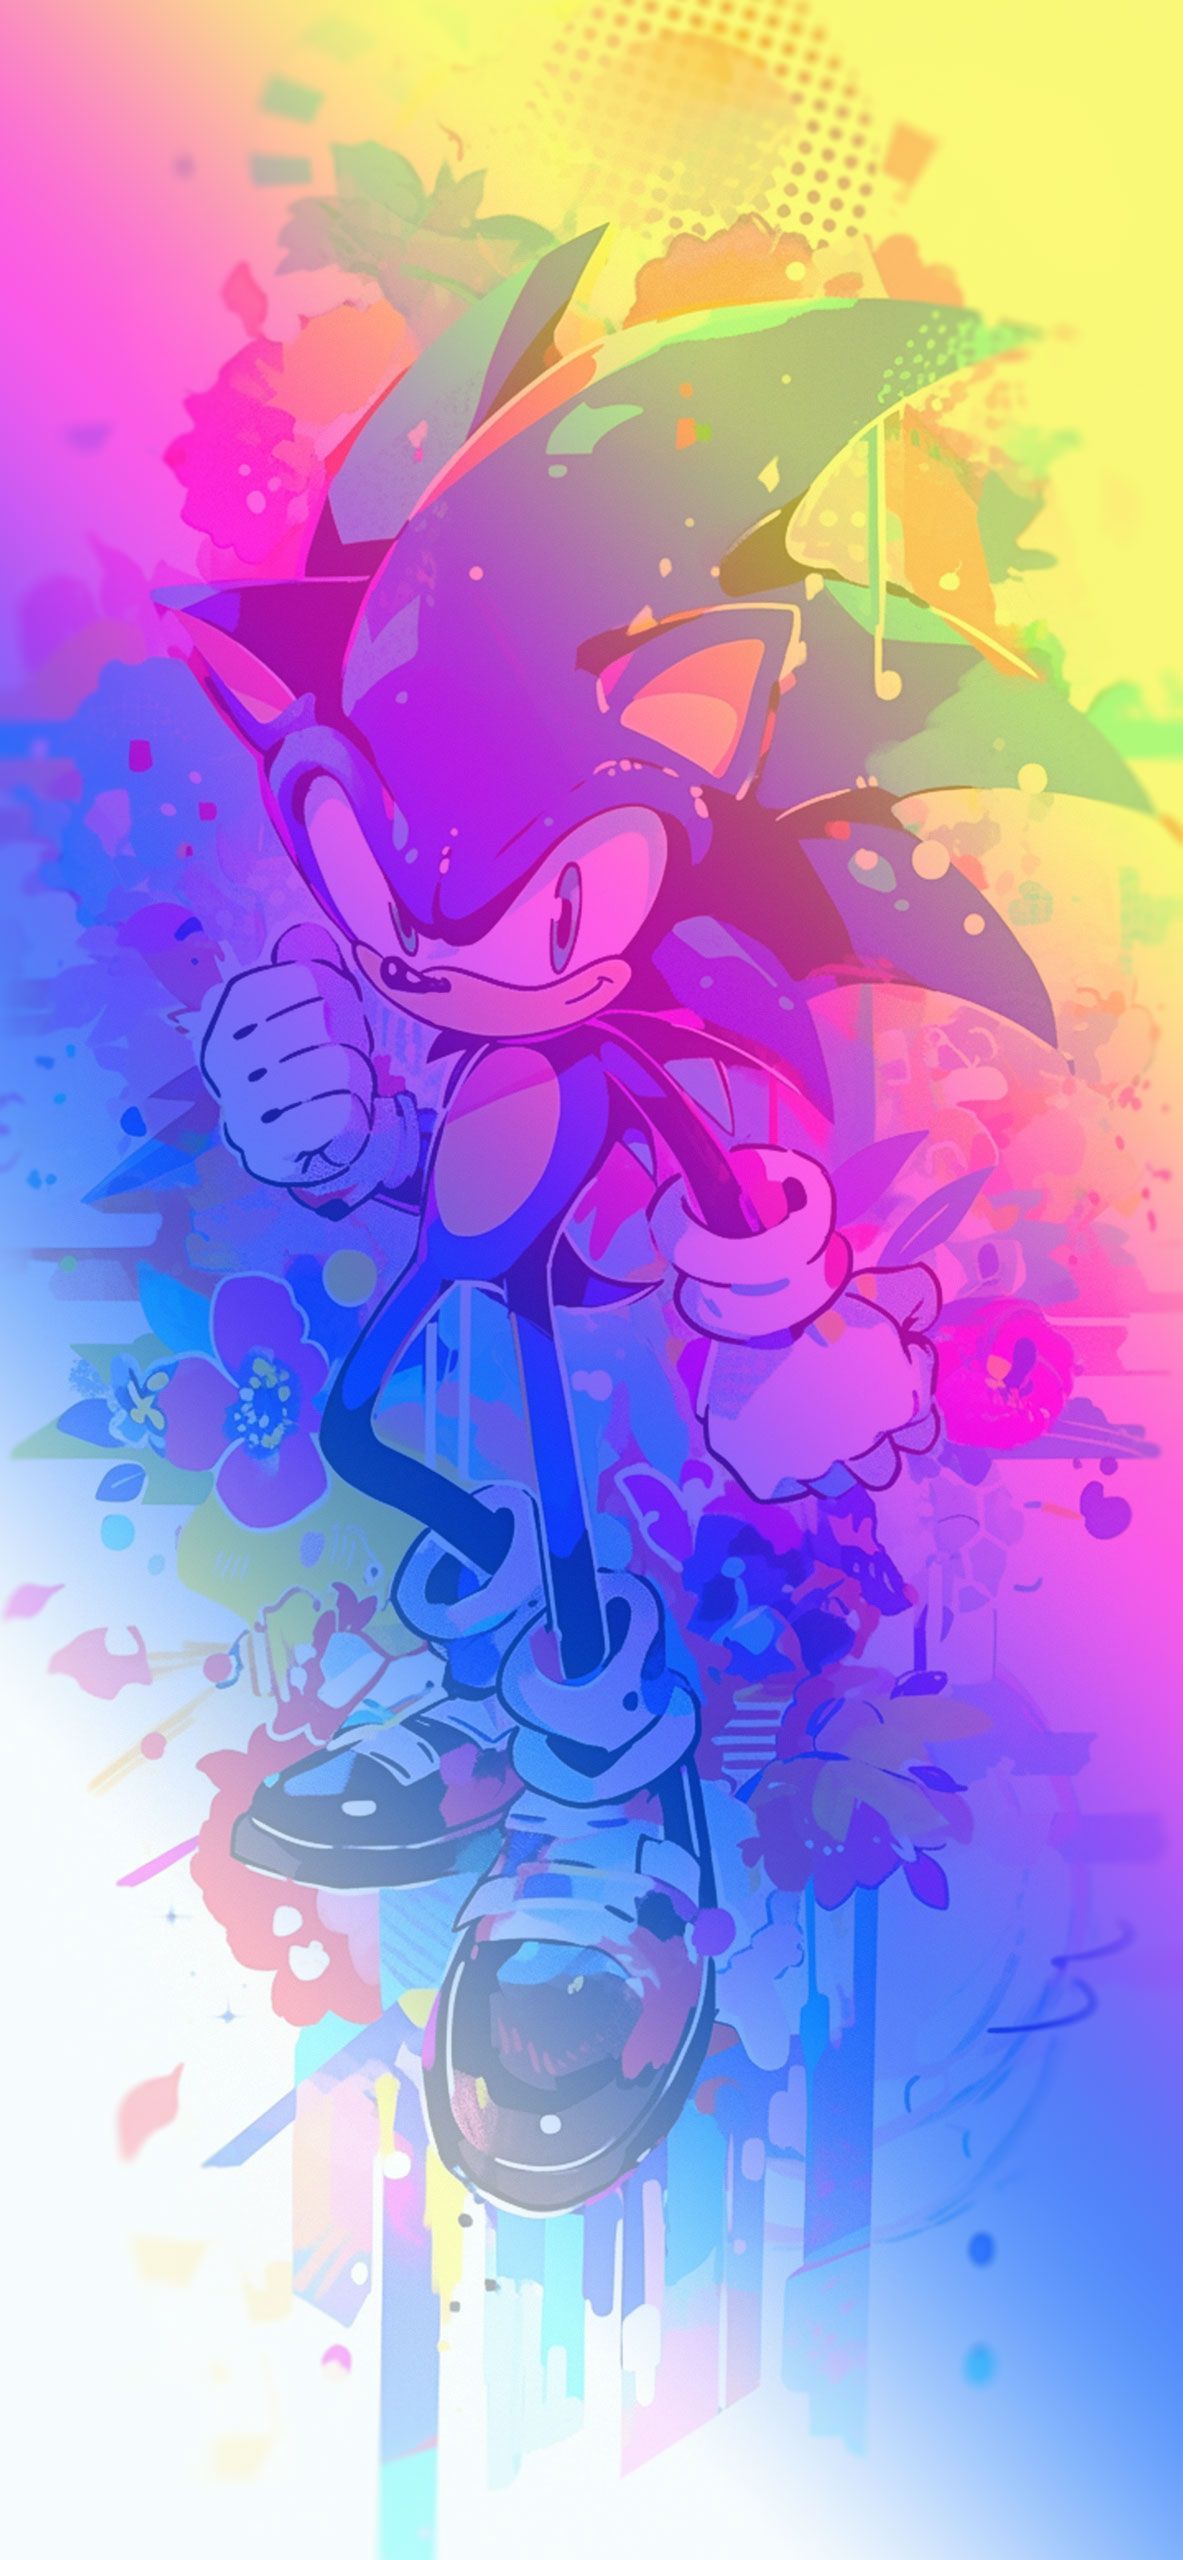 Sonic the Hedgehog wallpaper for mobile devices - Sonic